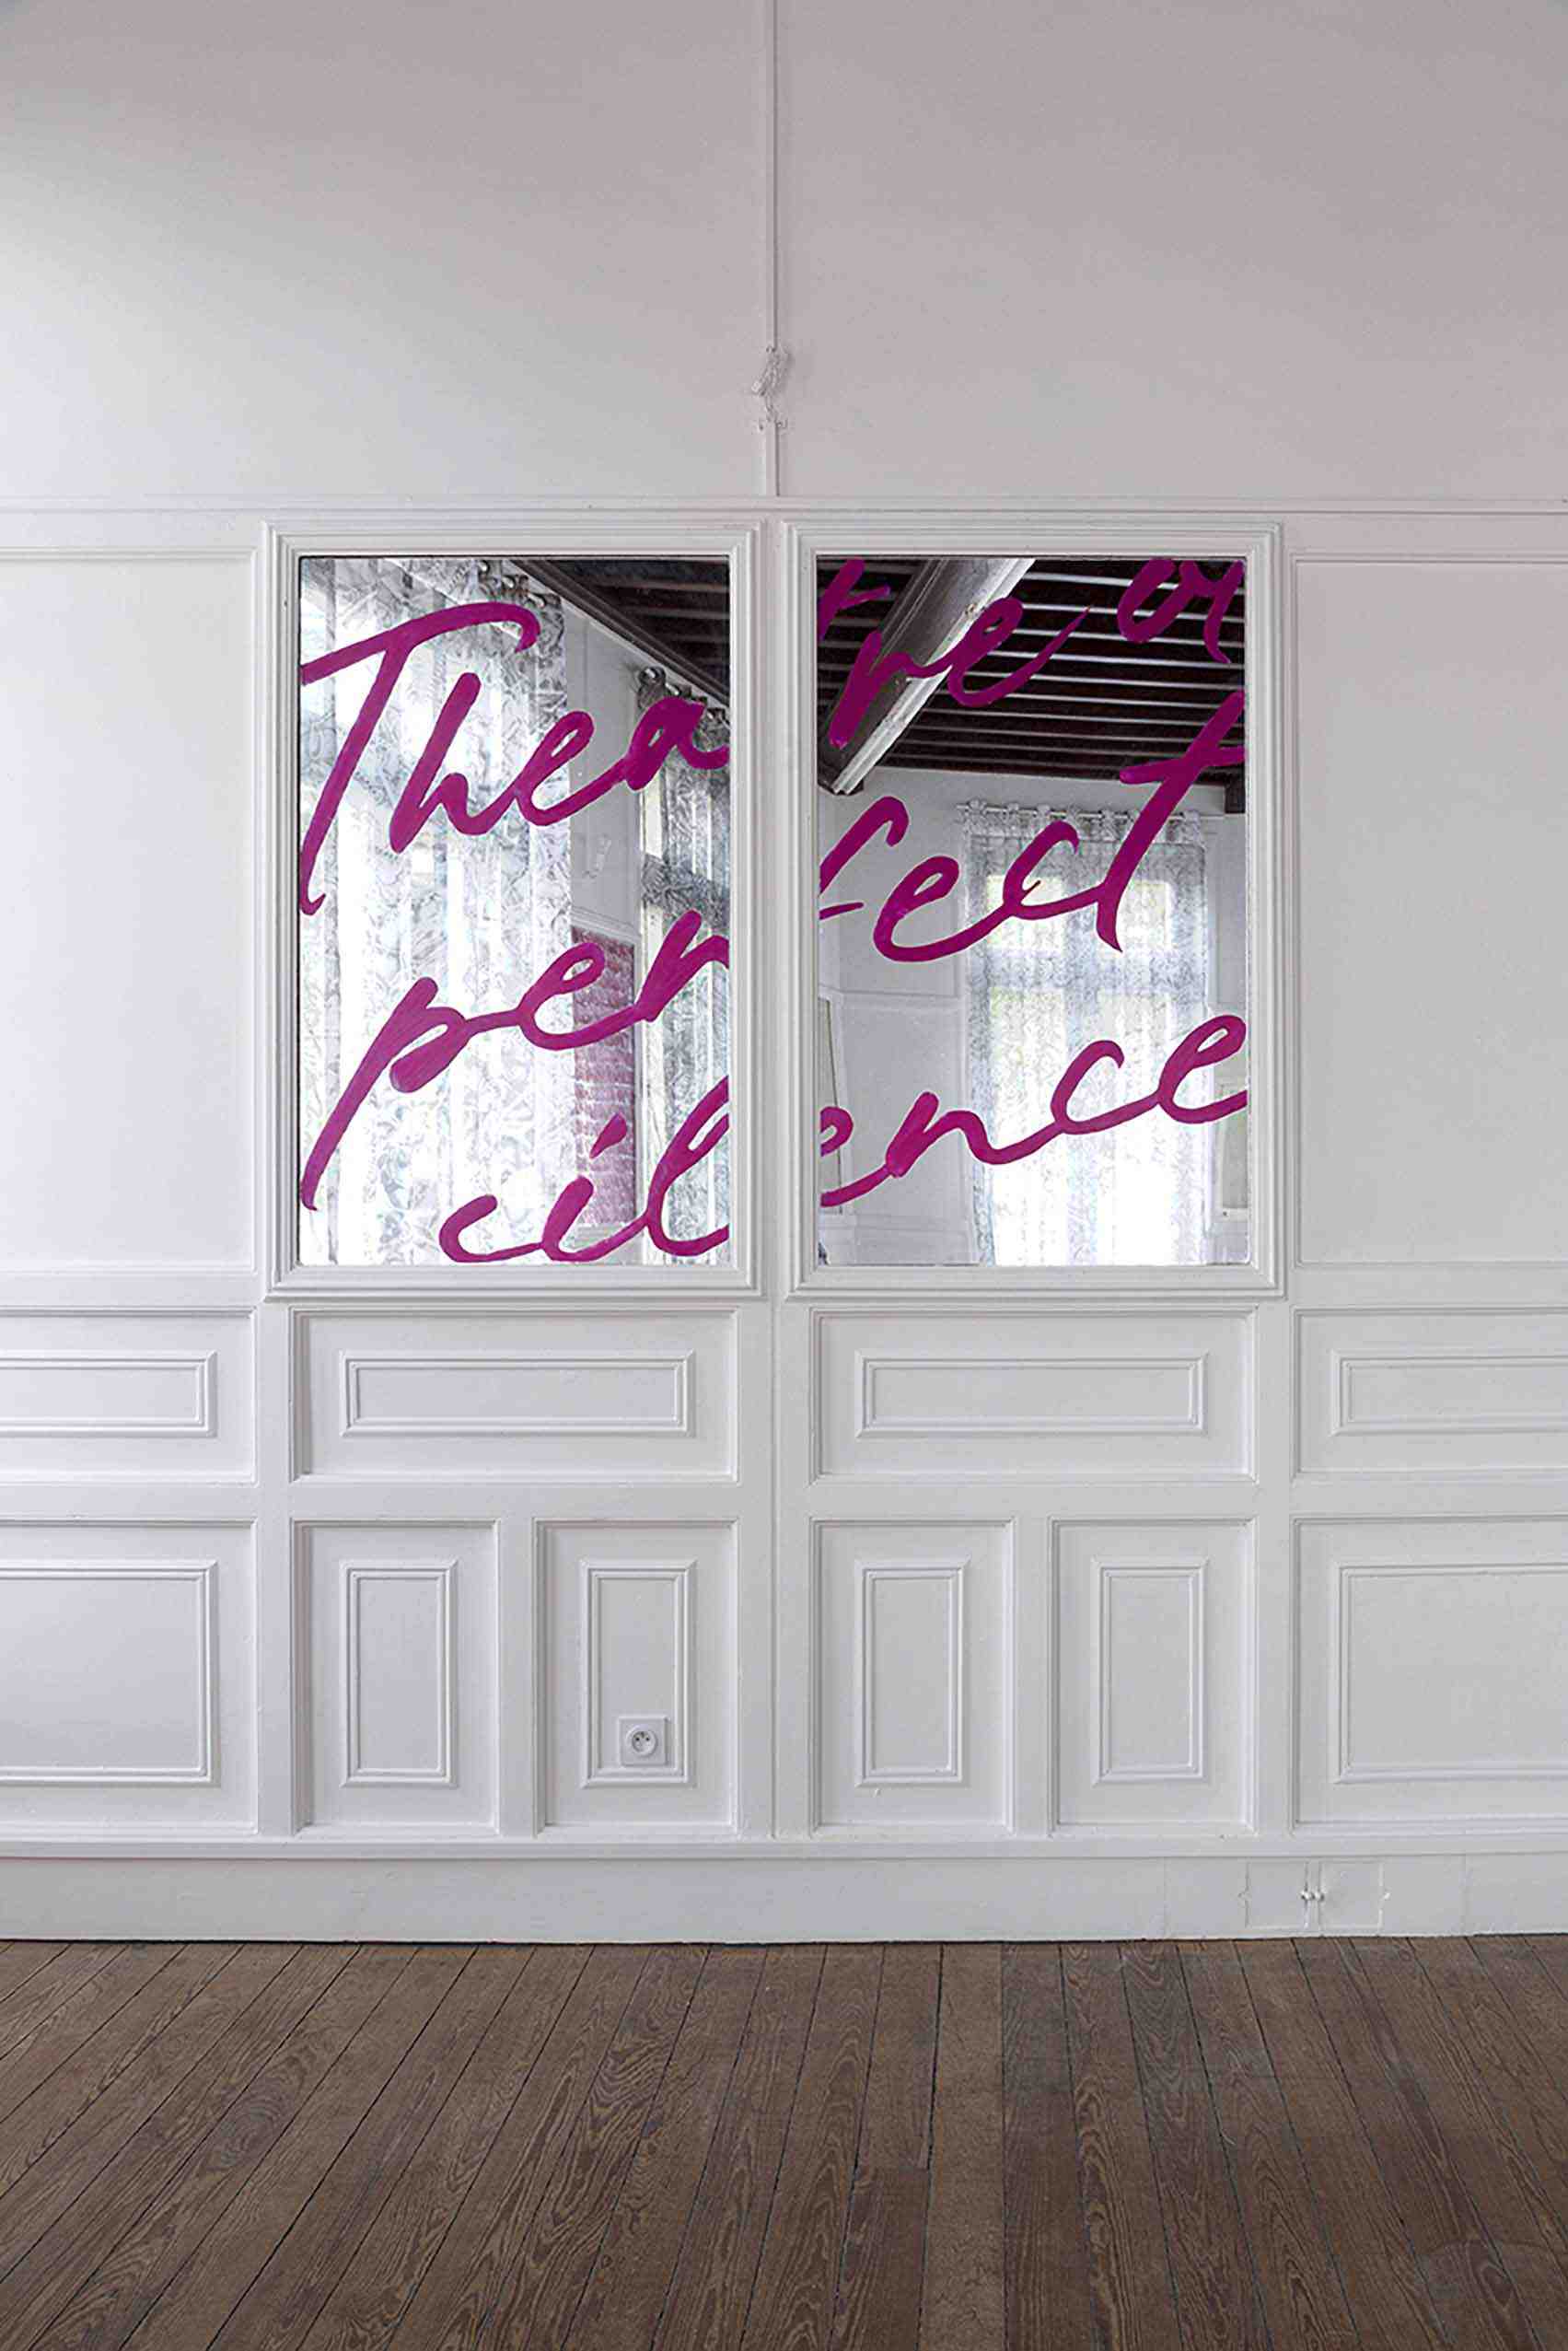 Theatre of Perfect Silence, 2022, lipstick on mirrors, 130 x 180 cm (diptych)